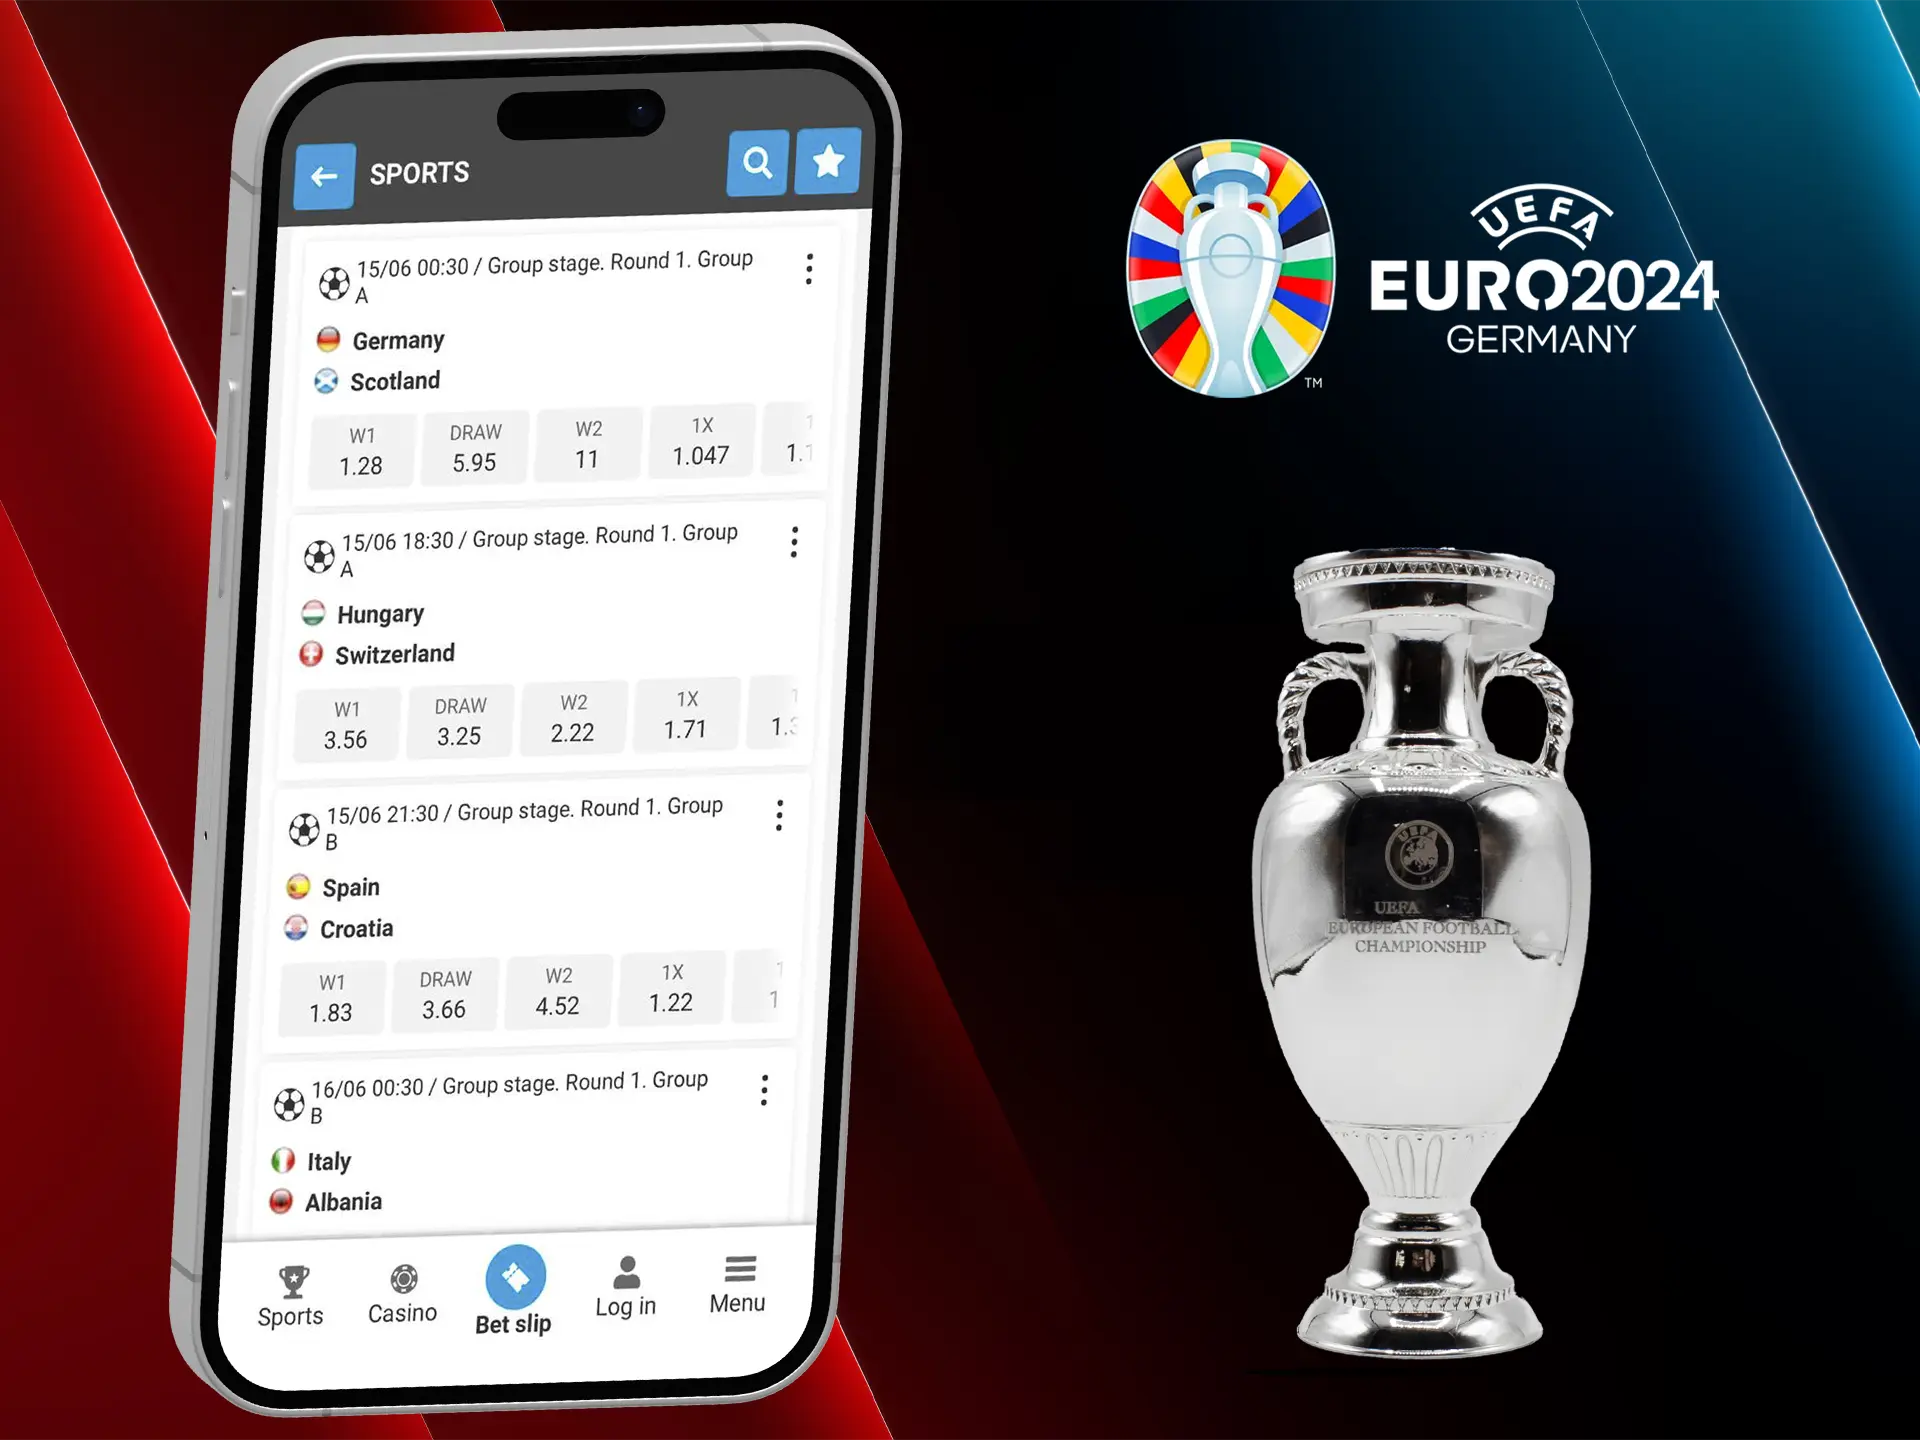 The upcoming Euro 2024 event will allow you to get obscenely rich by making correct match outcomes.